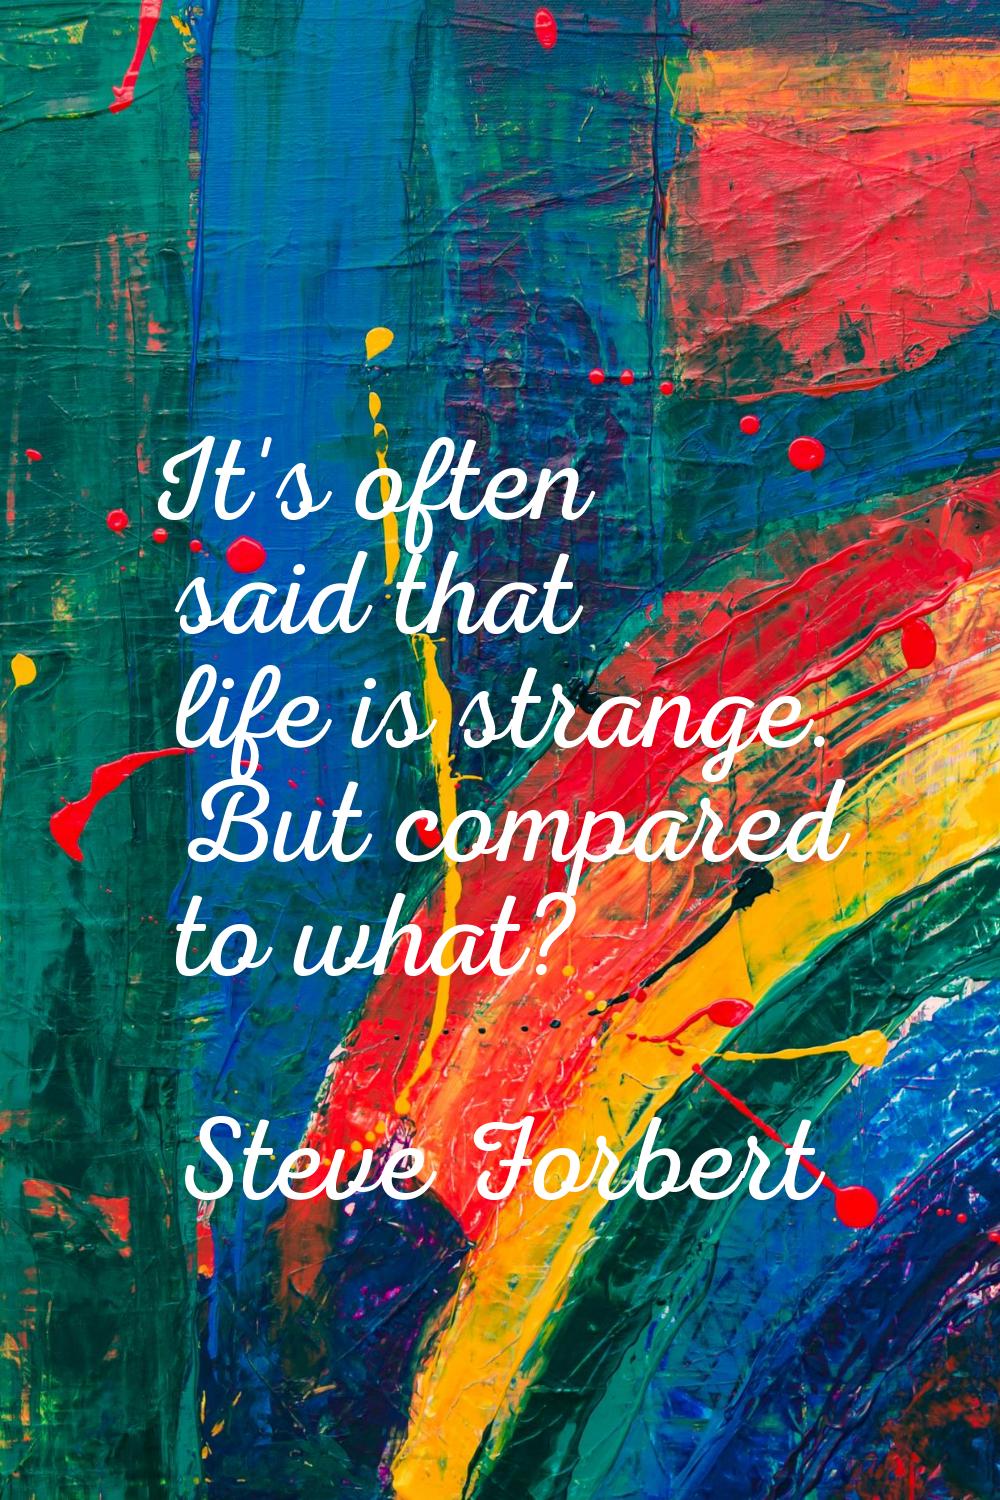 It's often said that life is strange. But compared to what?